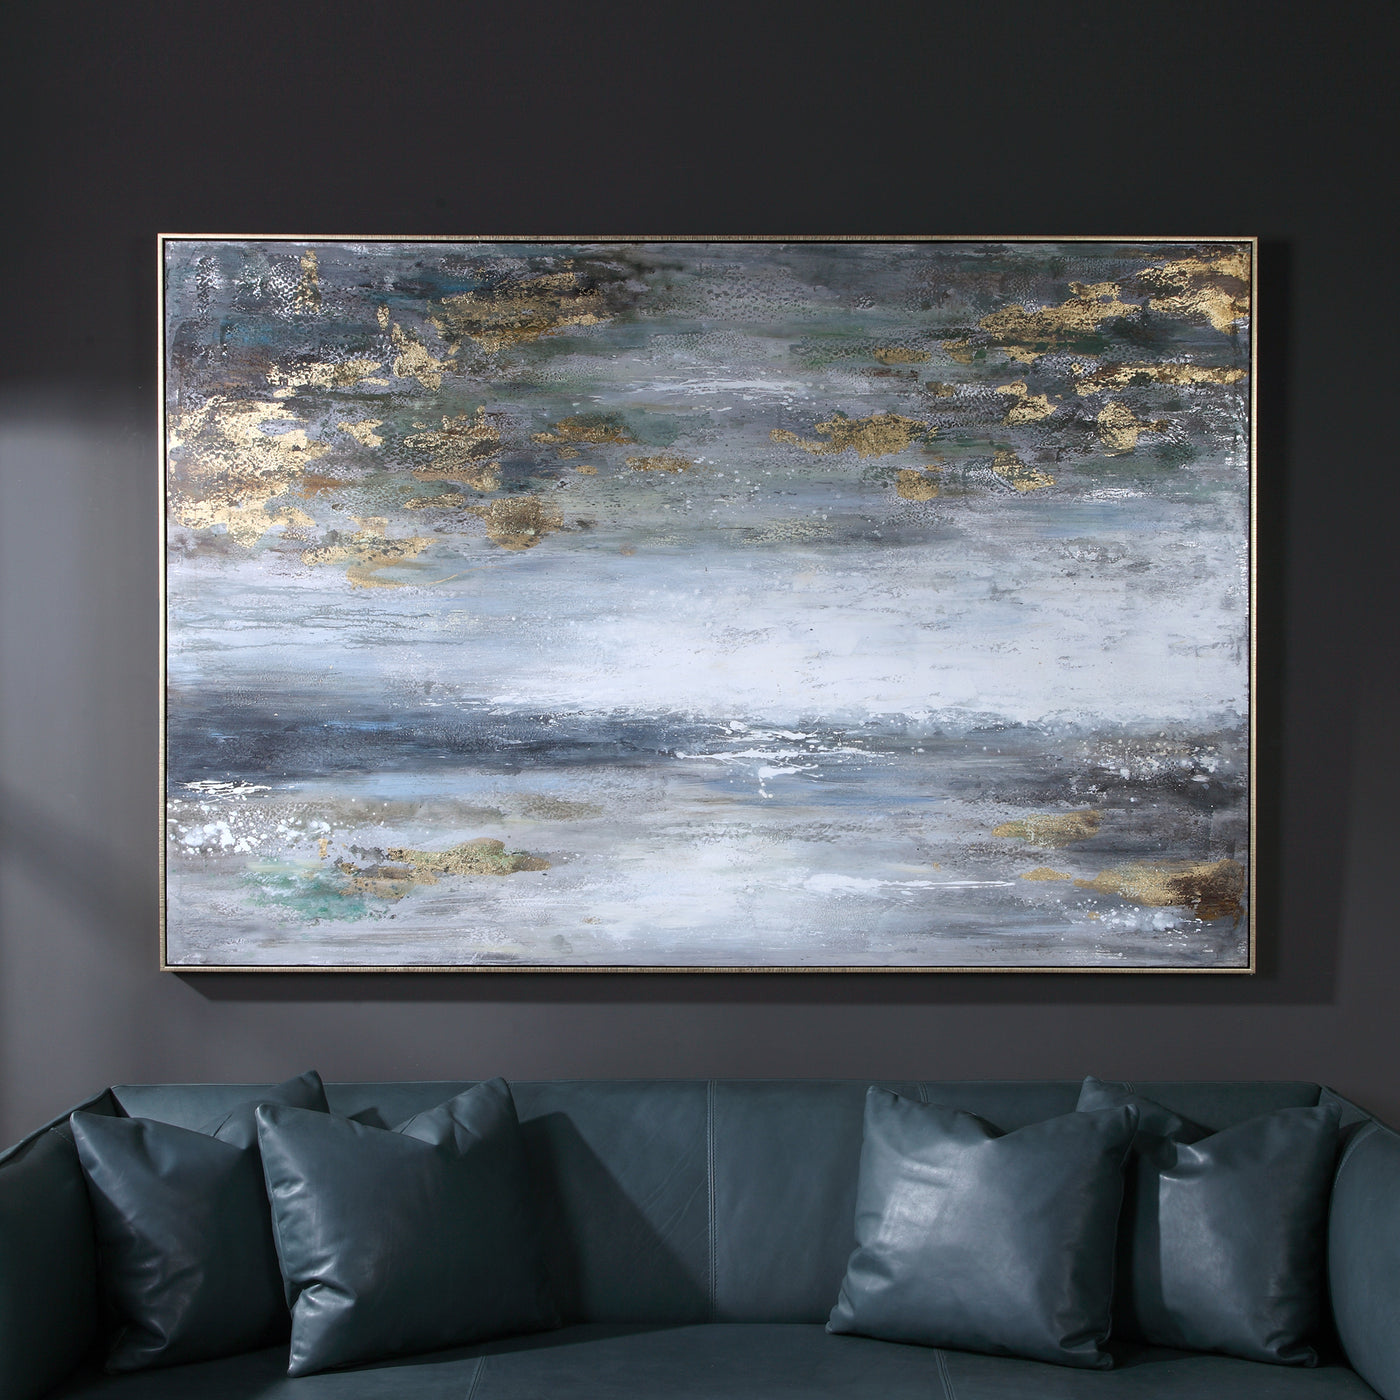 Moody Shades Of Gray And White Work Together To Create This Abstract Landscape Artwork. The Hand Painted Canvas Is Accente...